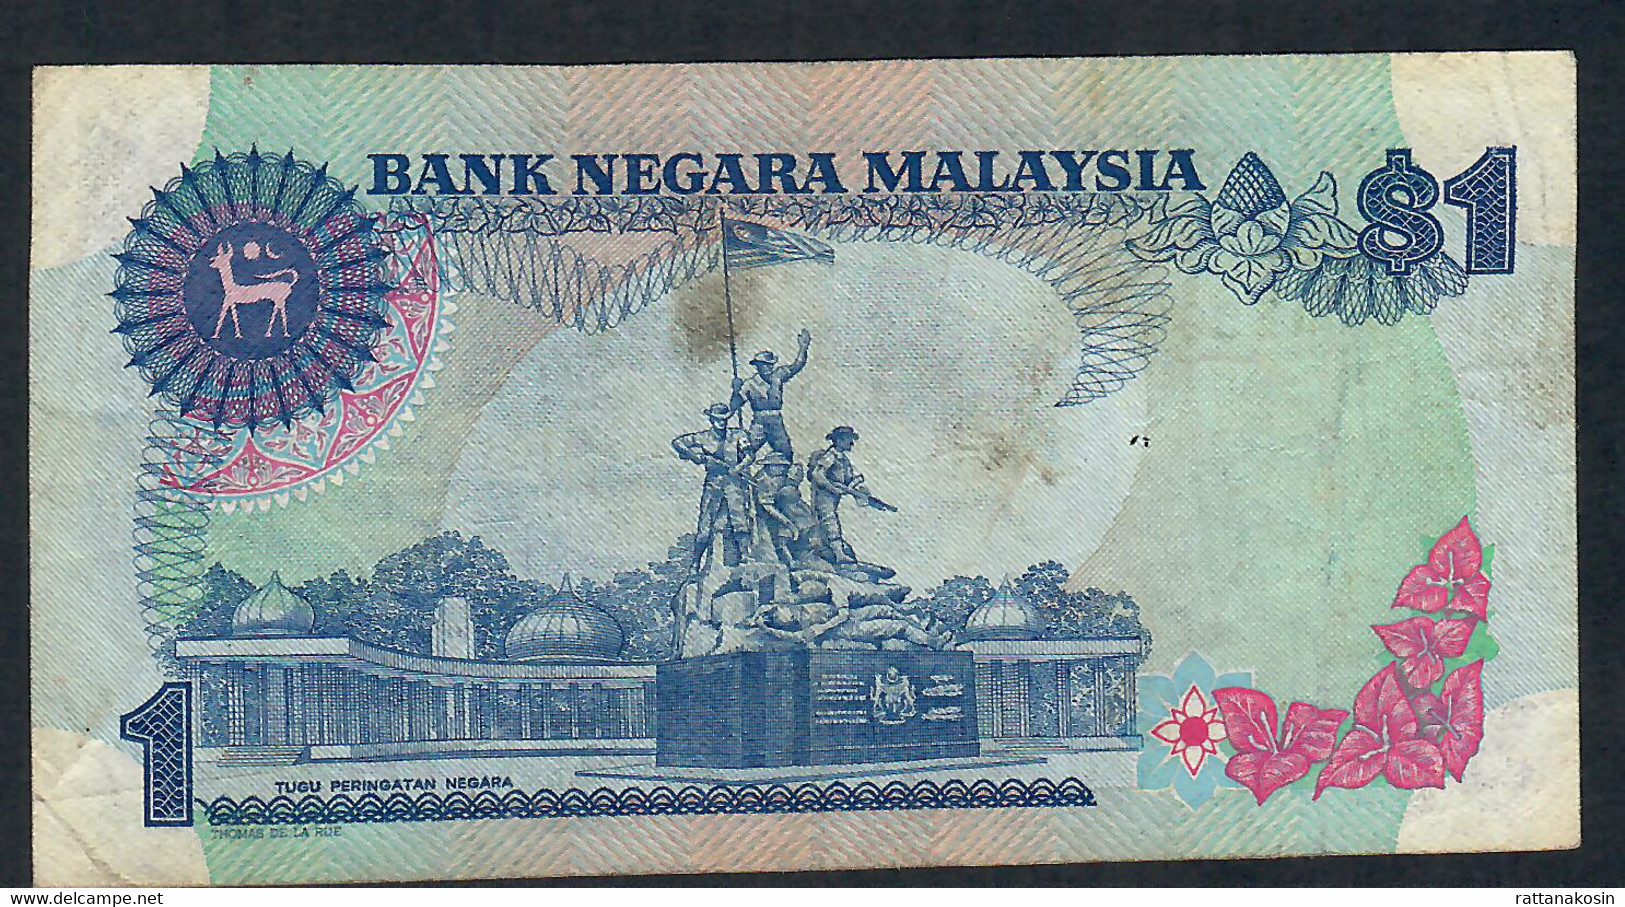 MALAYSIA  P19A 1 RINGGIT 1981 #AF  Printer TdlR RARE VARIETY  FINE++/Better  NO P.h.  ! ! - Malesia